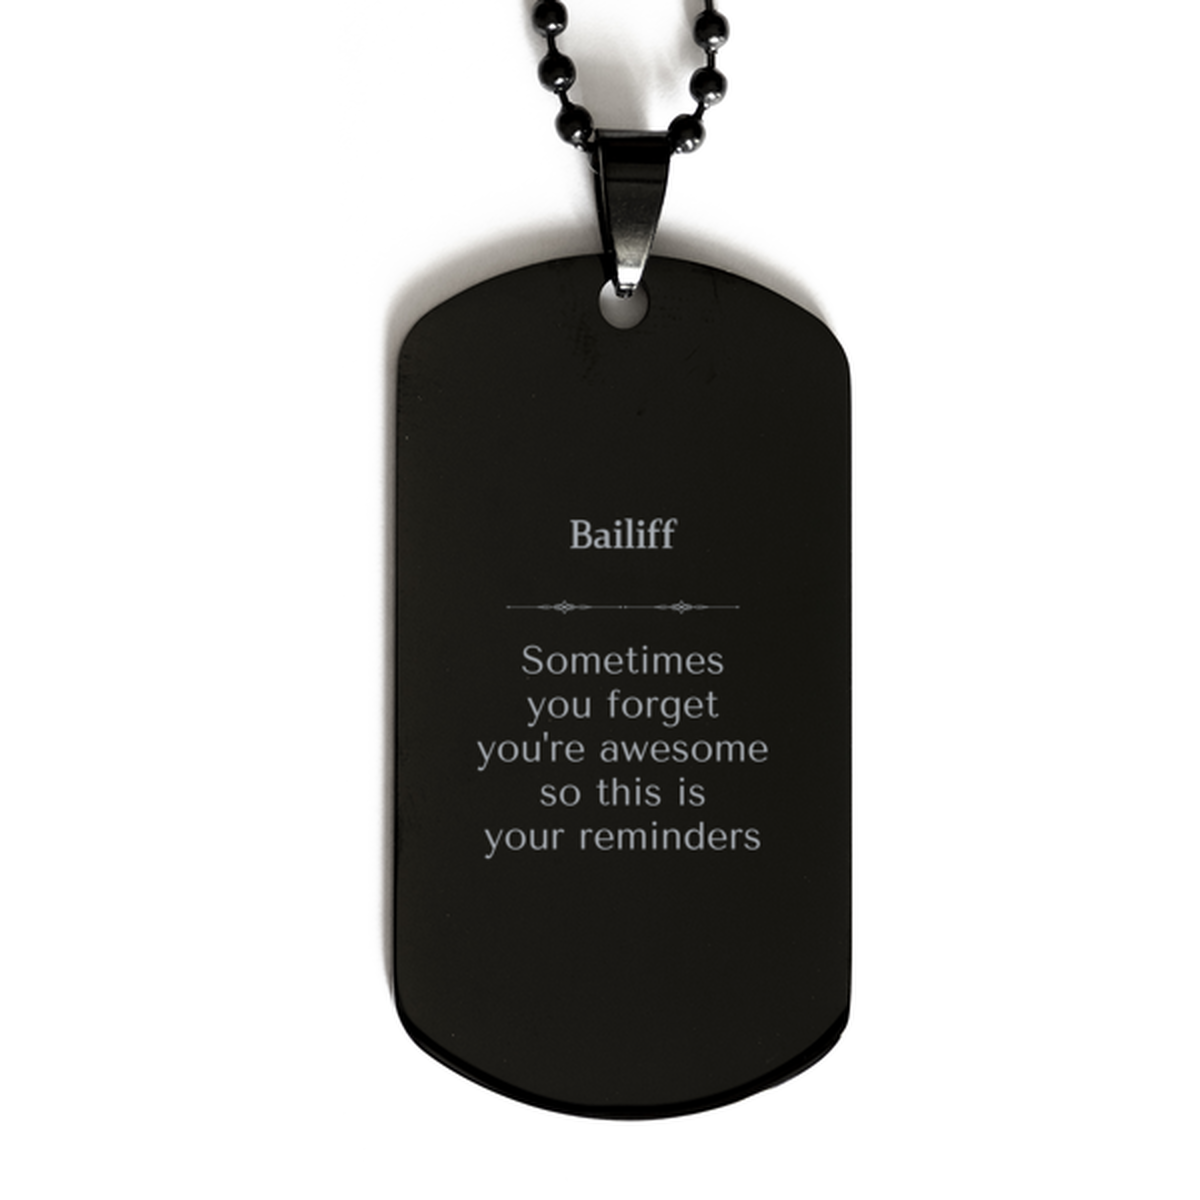 Sentimental Bailiff Black Dog Tag, Bailiff Sometimes you forget you're awesome so this is your reminders, Graduation Christmas Birthday Gifts for Bailiff, Men, Women, Coworkers